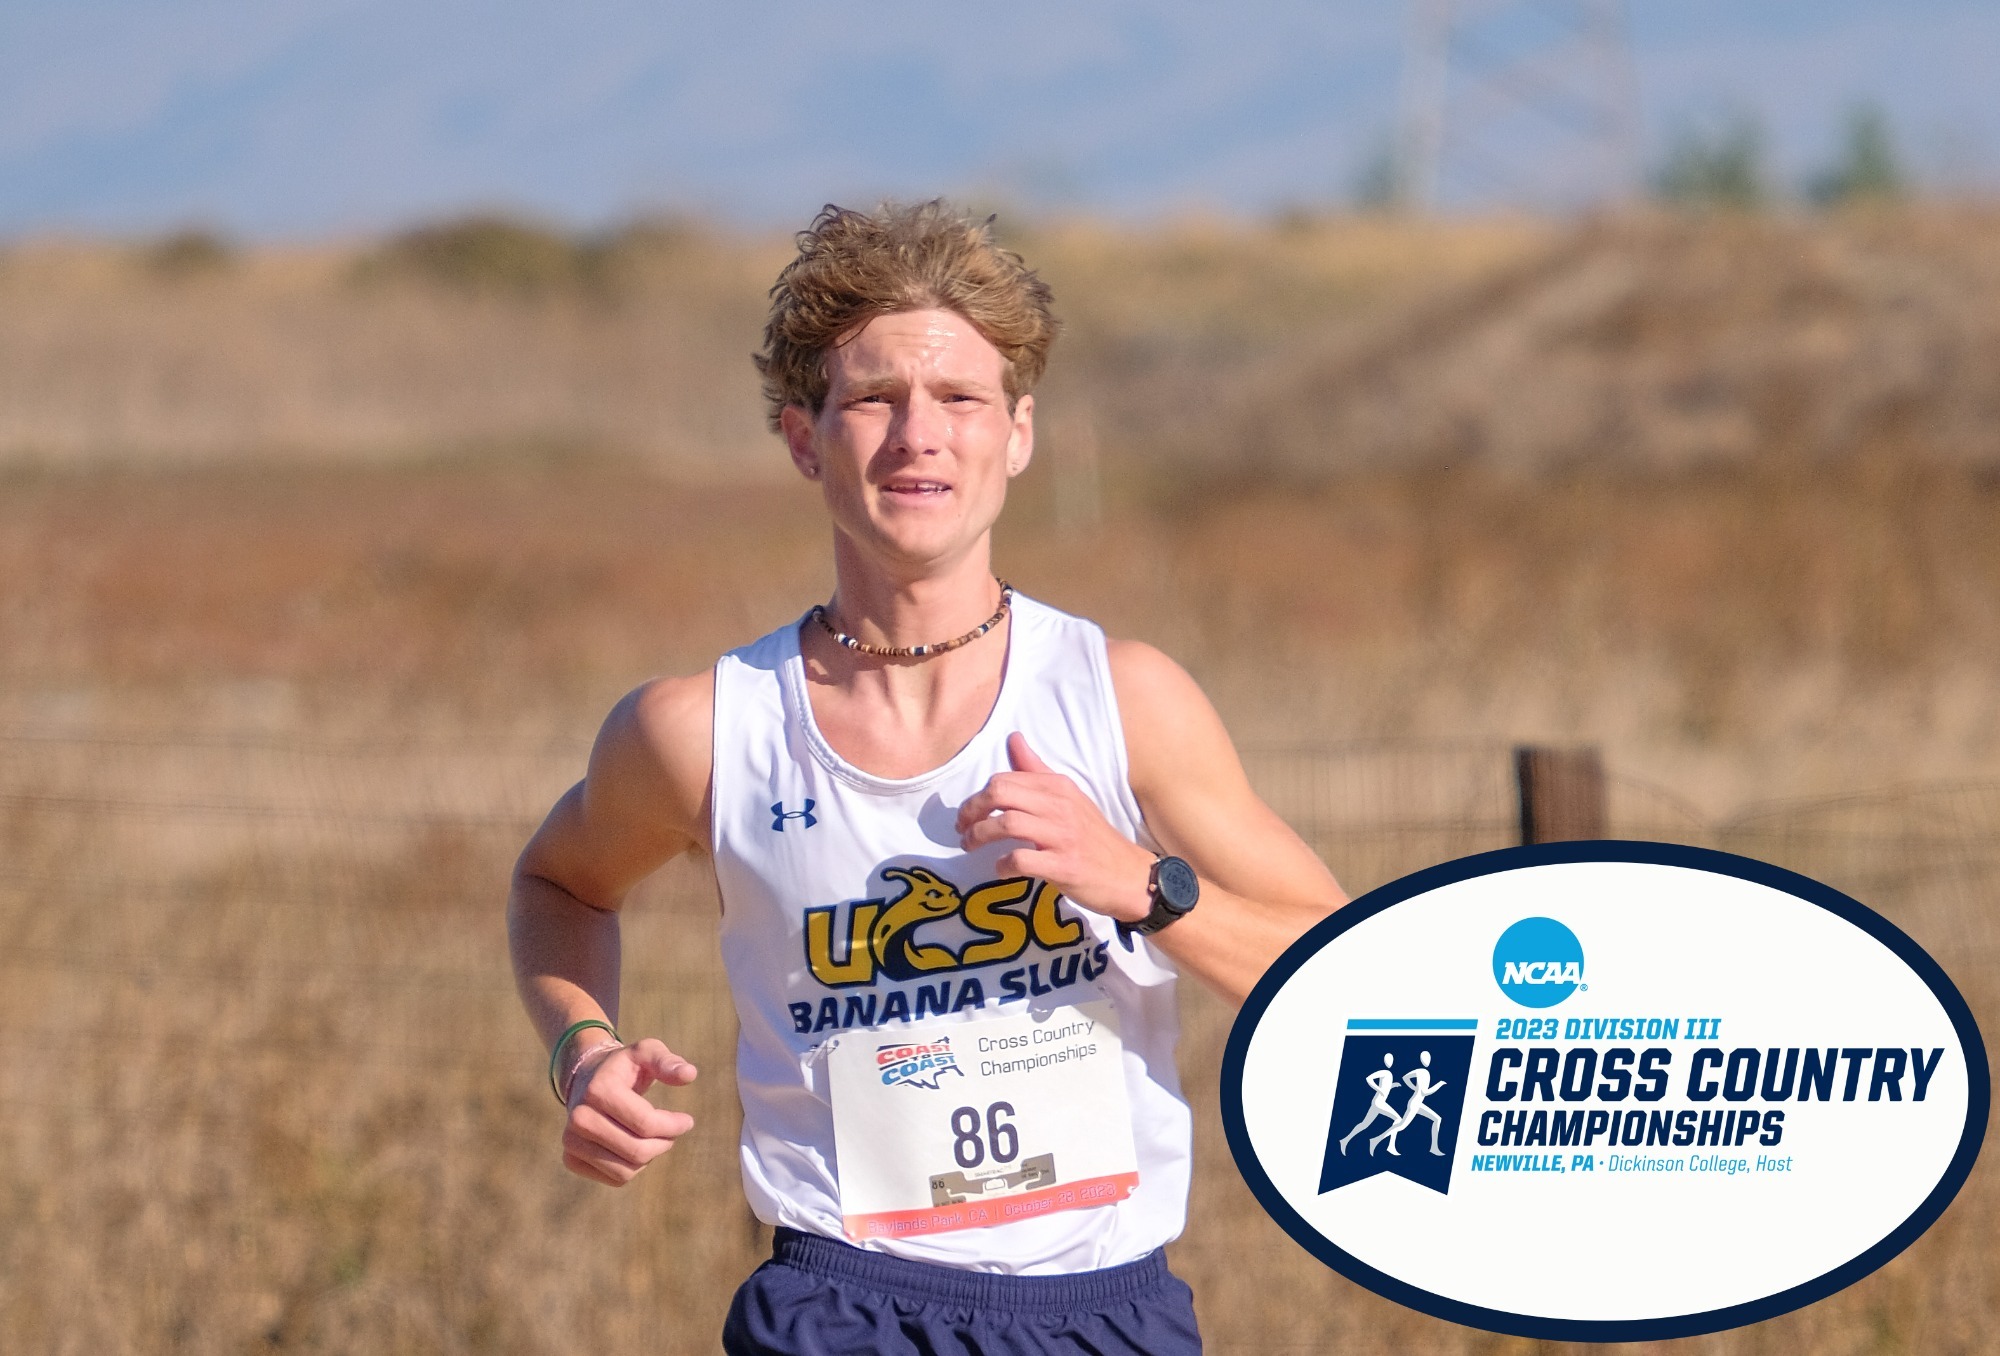 UCSC's Eric Jackson earns All American honors at NCAA Championships